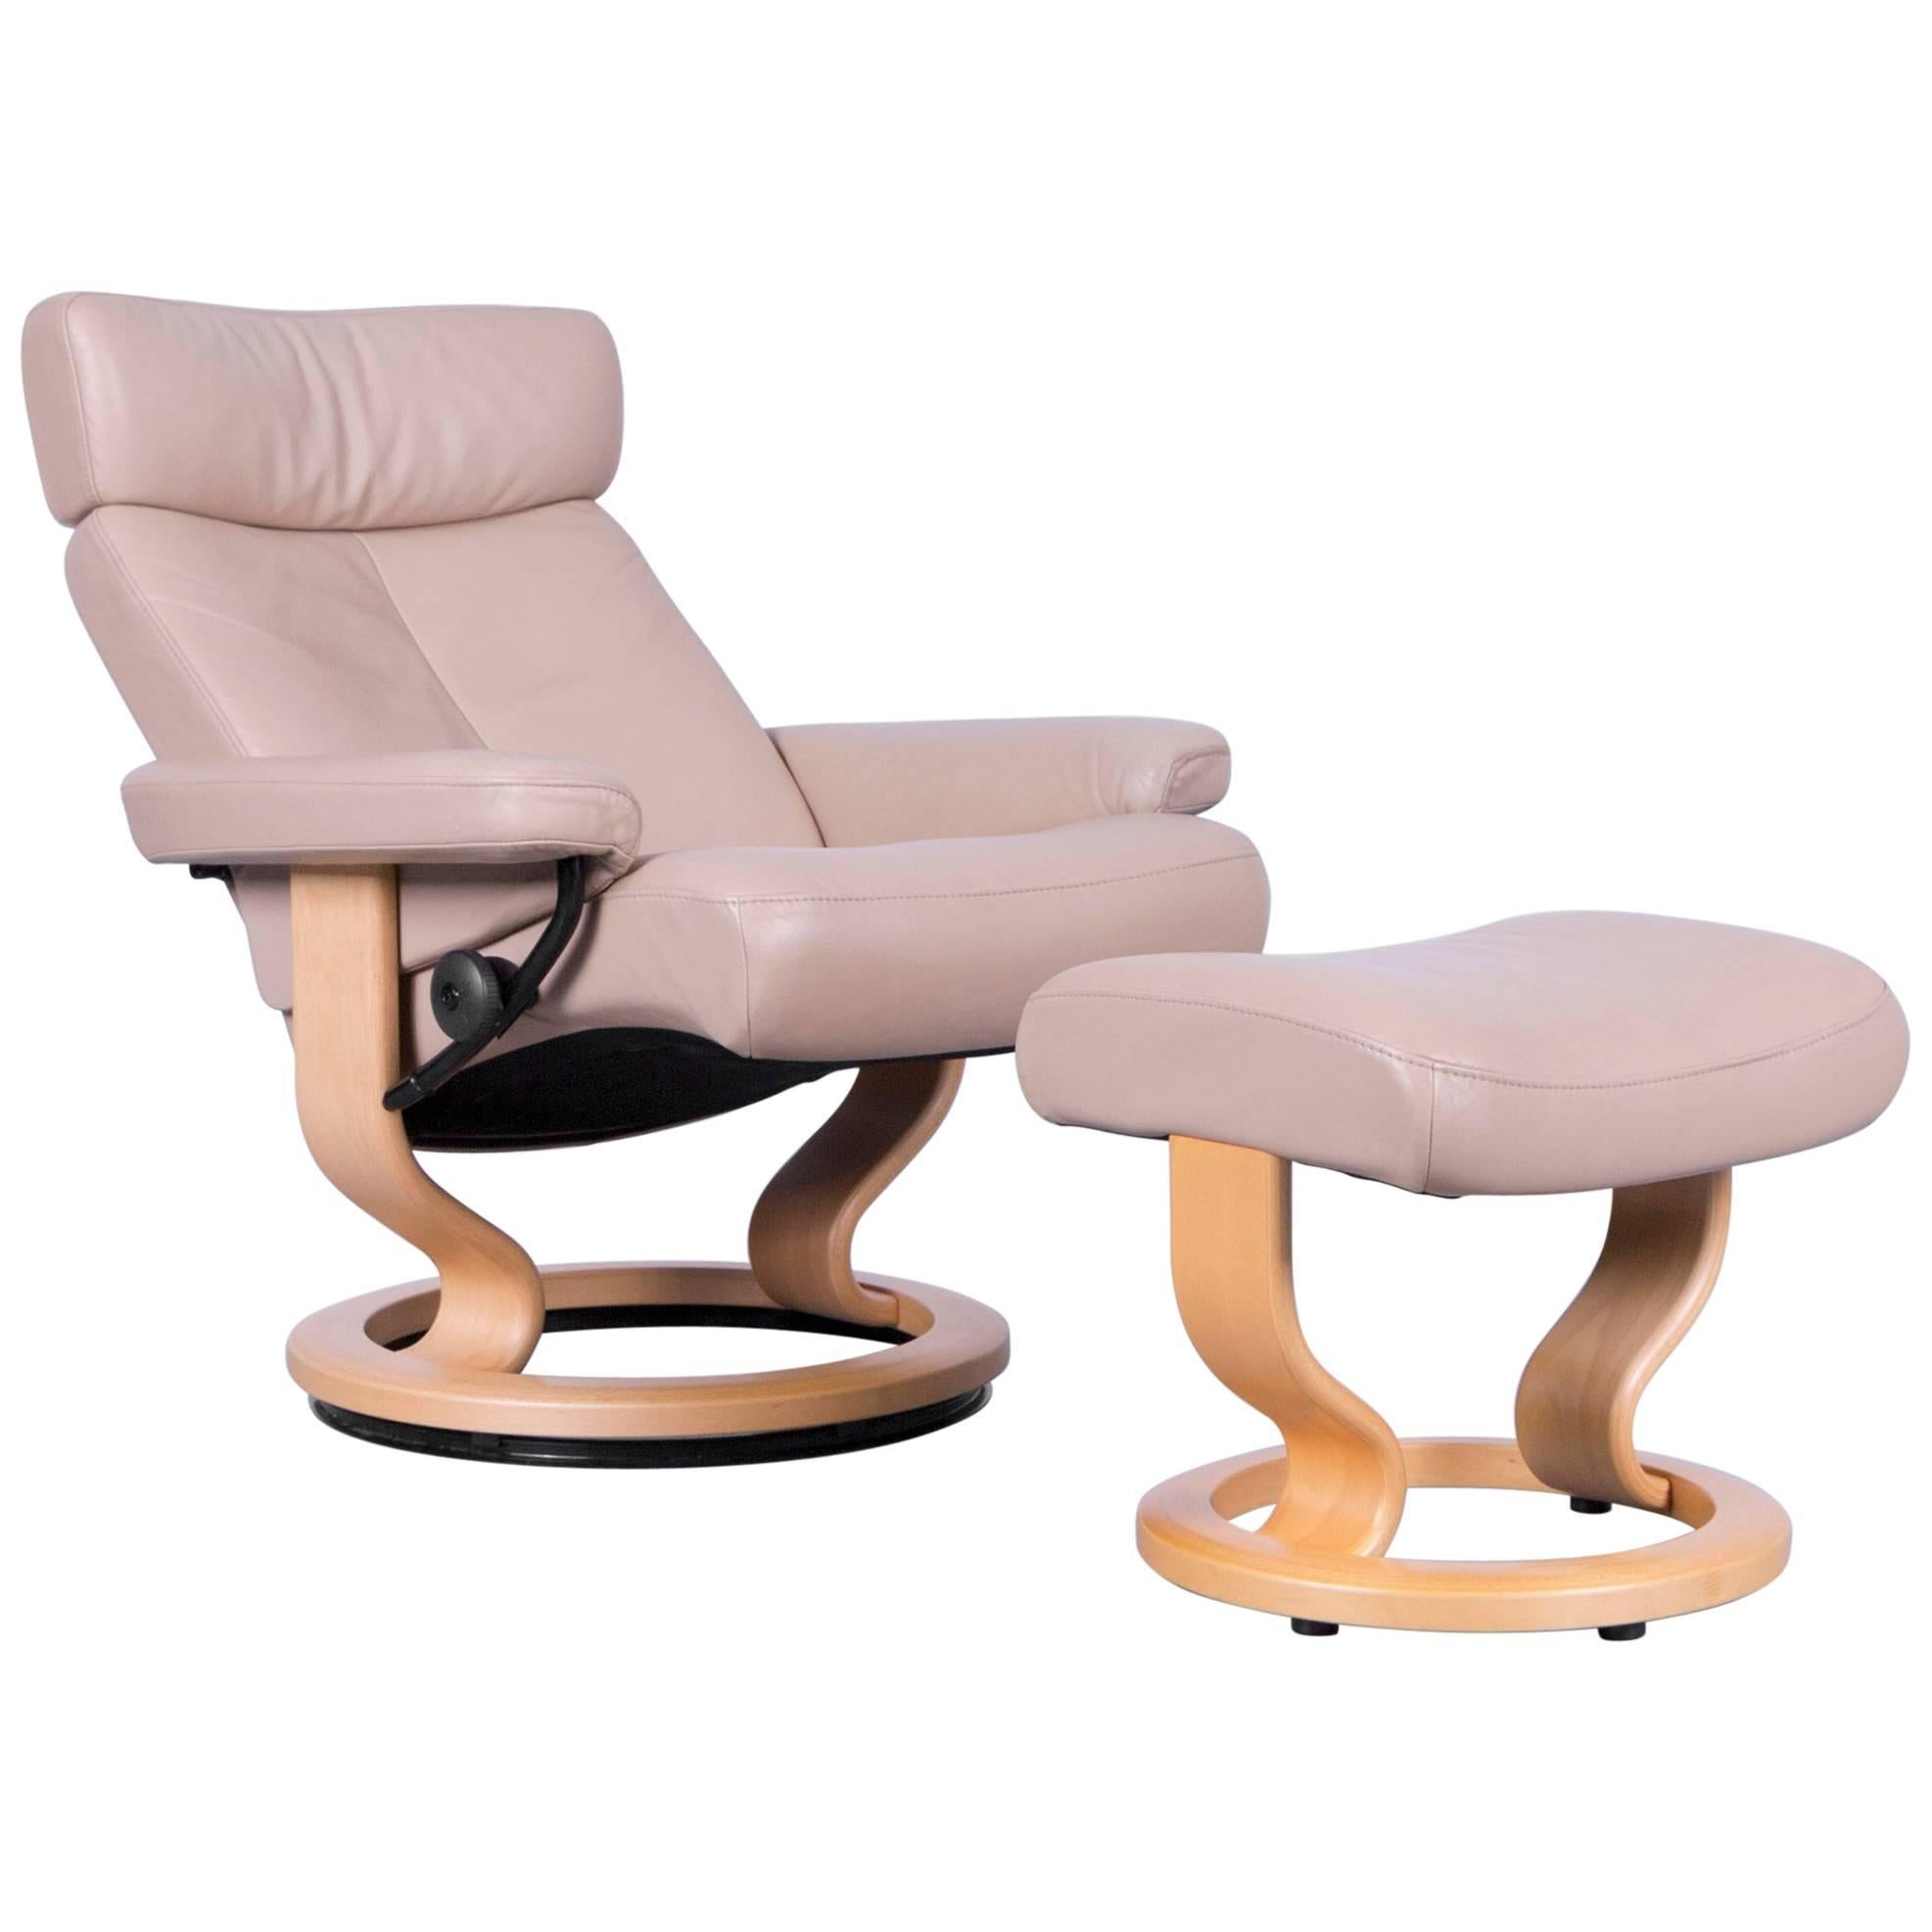 Ekornes Stressless Orion Armchair and Footstool Beige Leather Recliner Chair For Sale